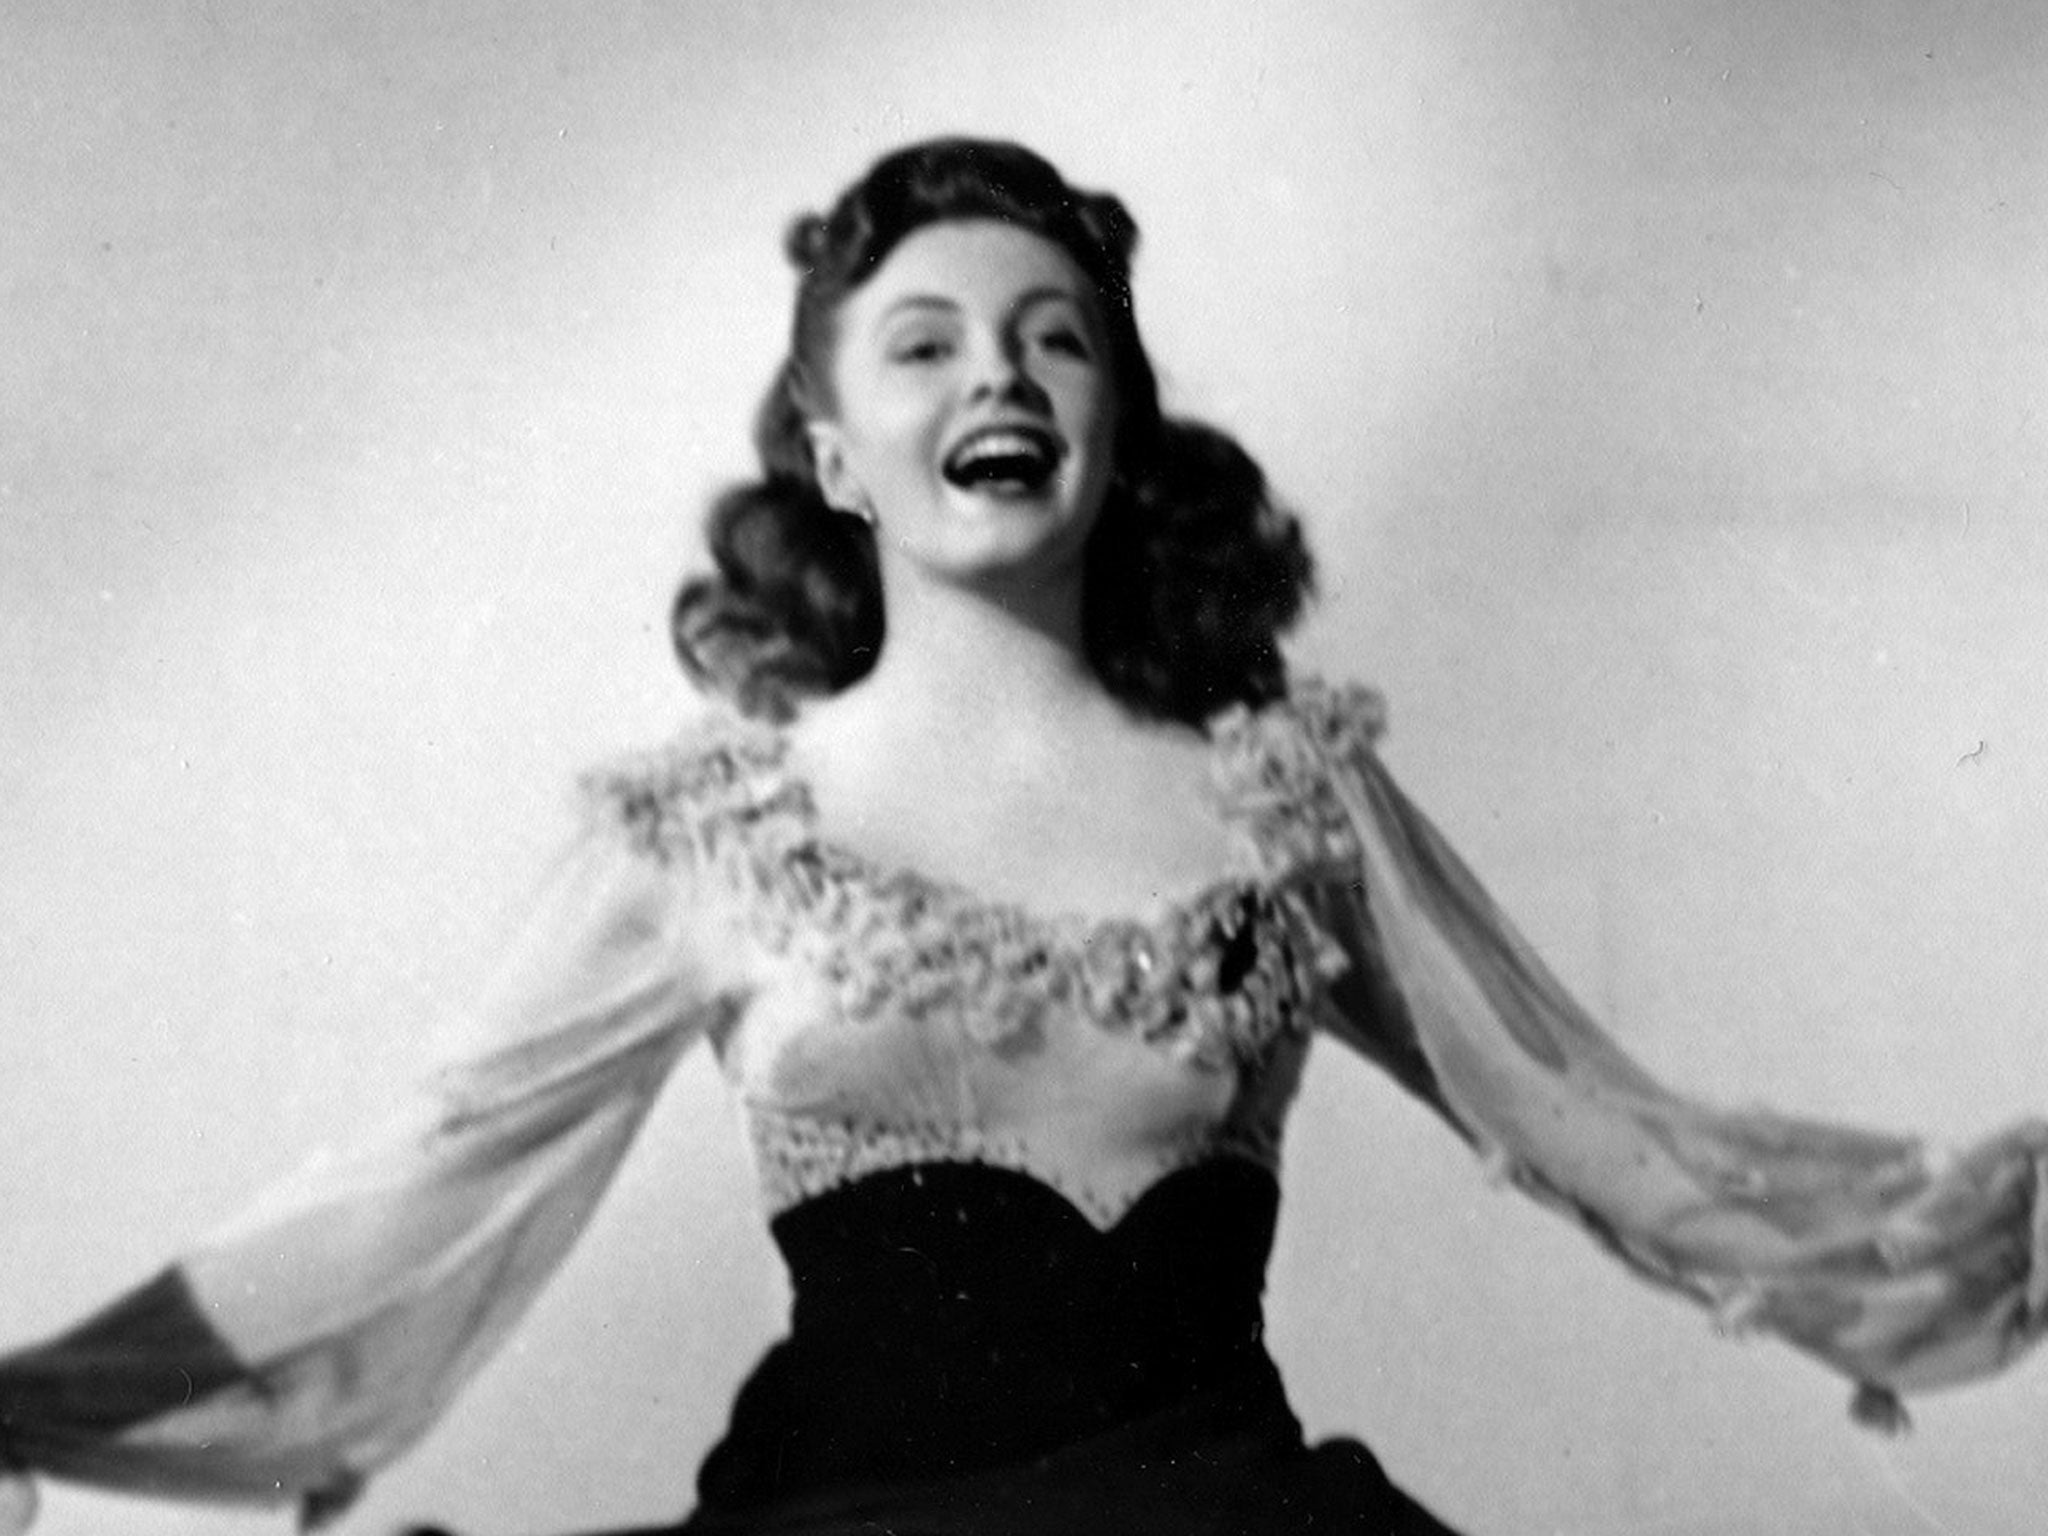 Joan Leslie performs a dance routine from the 1943 movie "The Sky's the Limit"